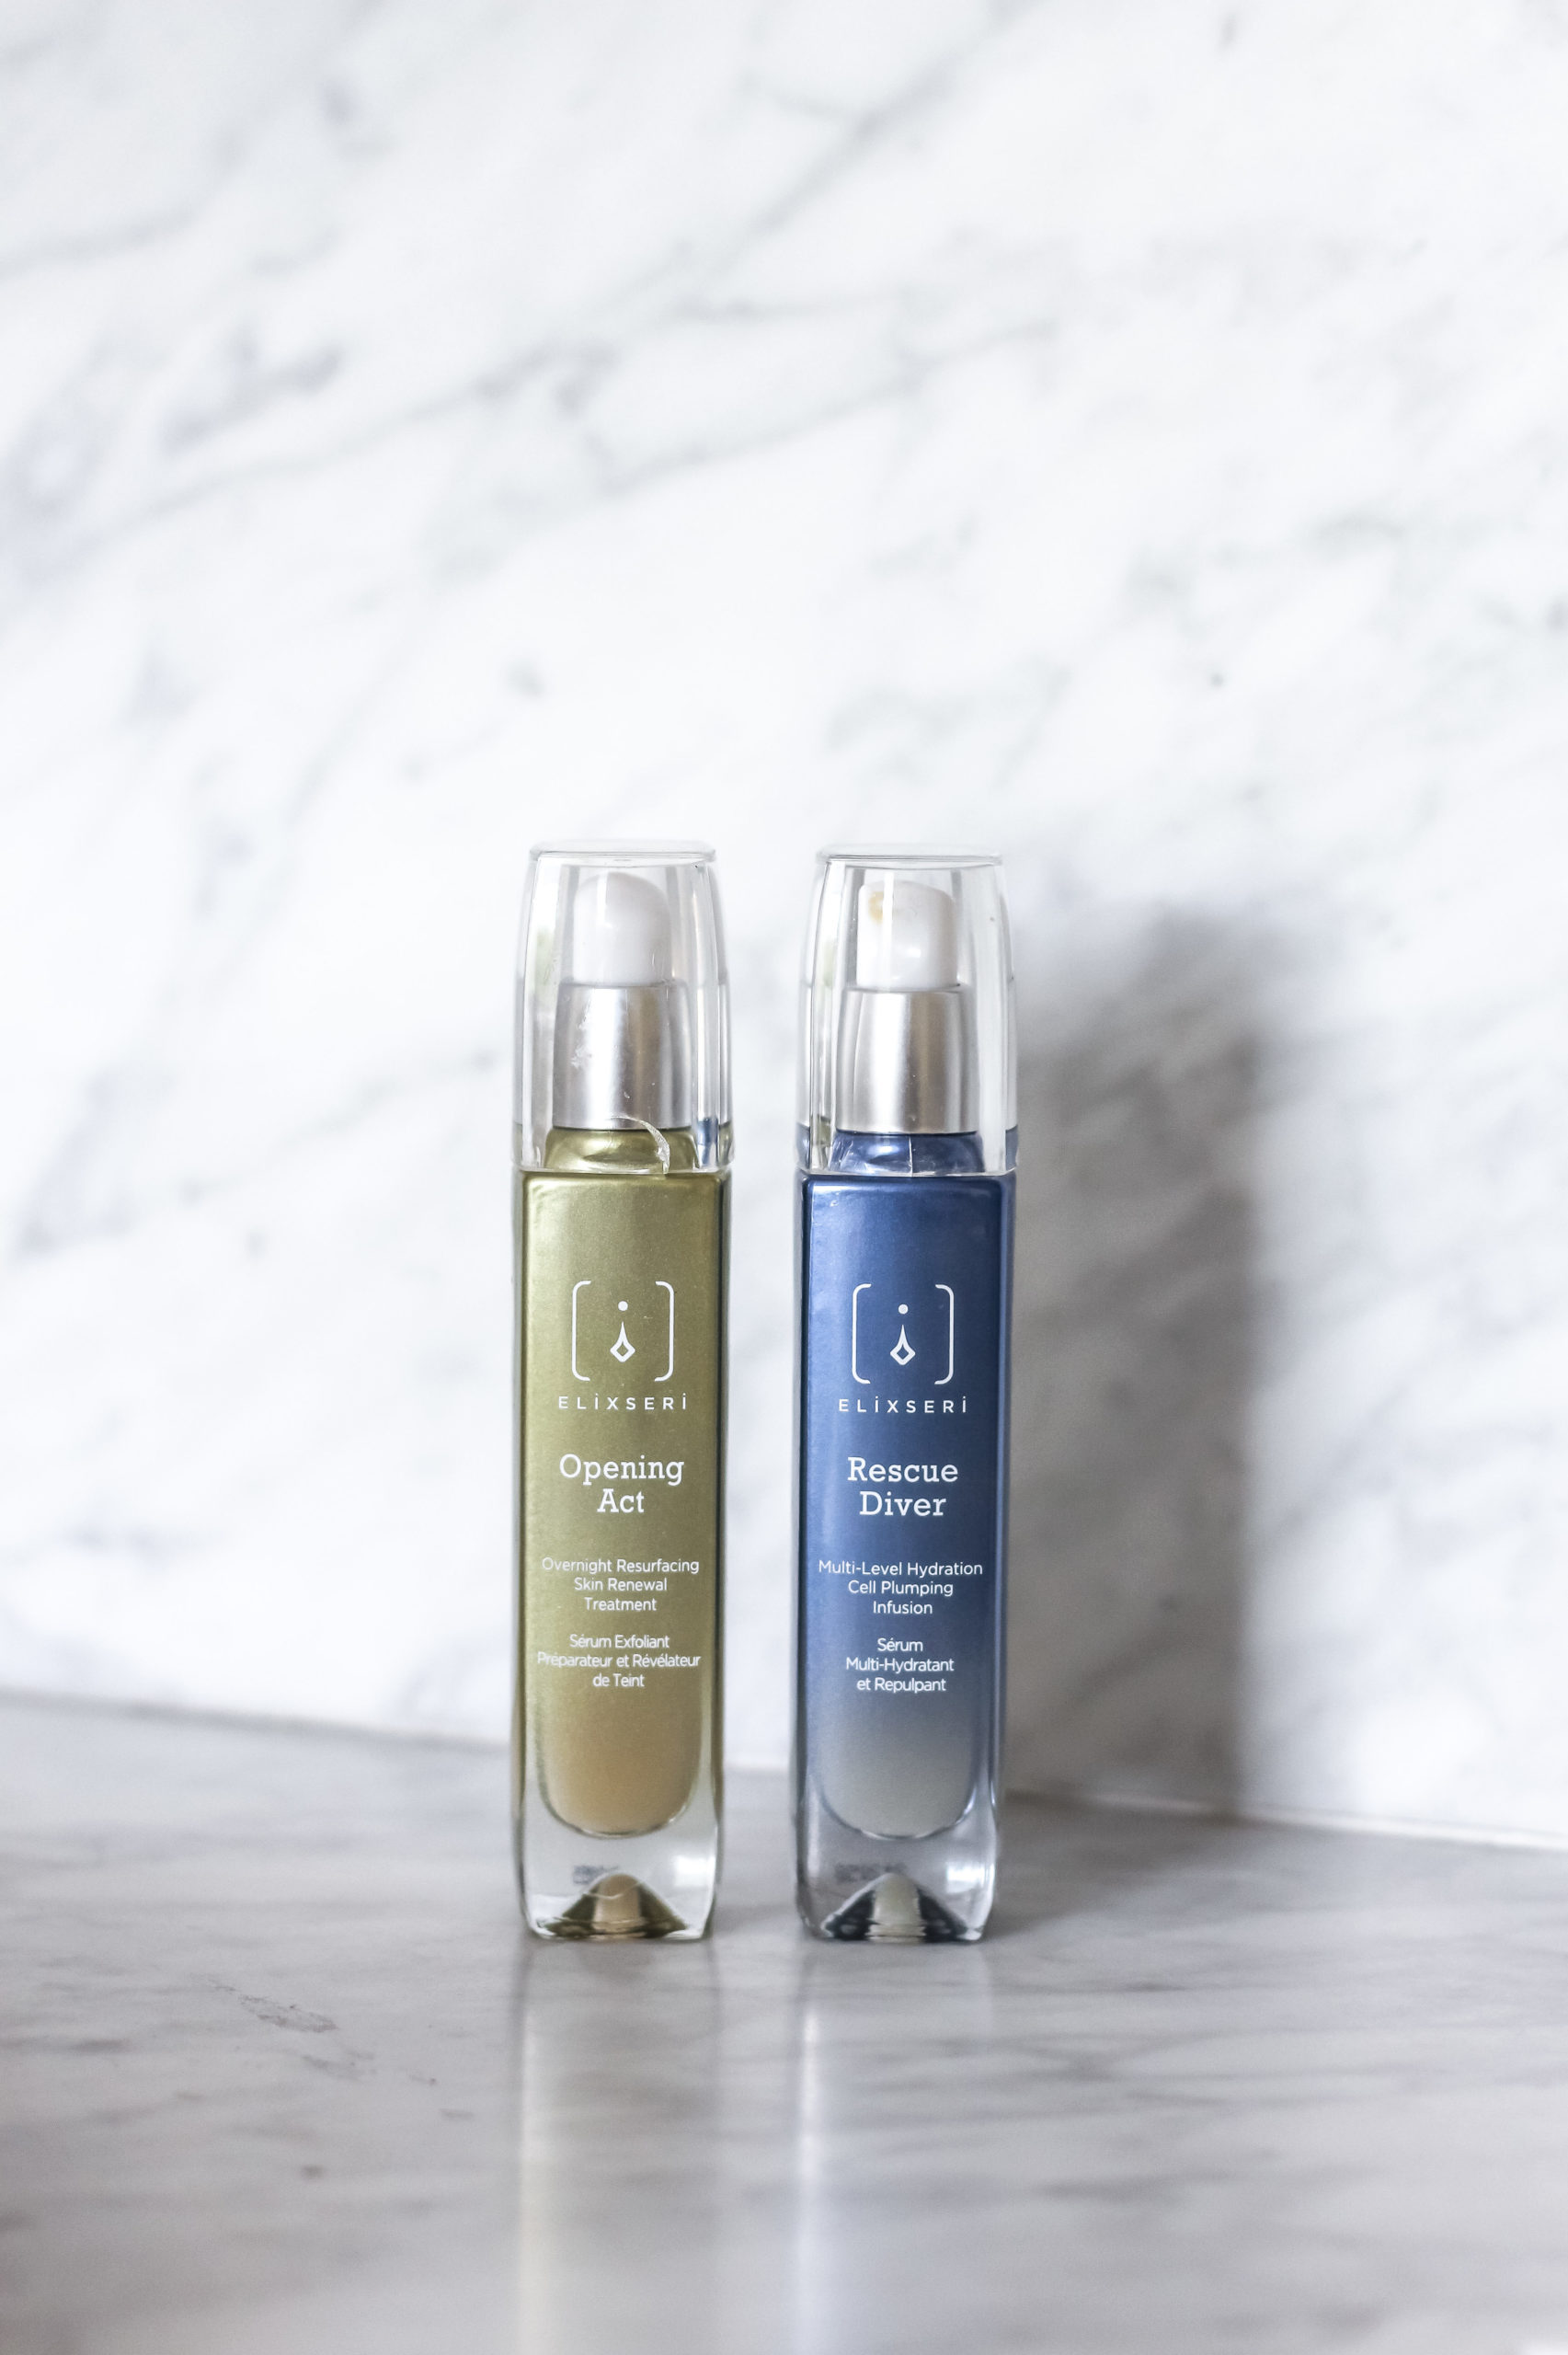 Elixseri serums in a bathroom setting. Opening Act overnight resurfacing serum and Rescue Diver multi-level hydrating serum are Suzanne Duckett's favourite serums.